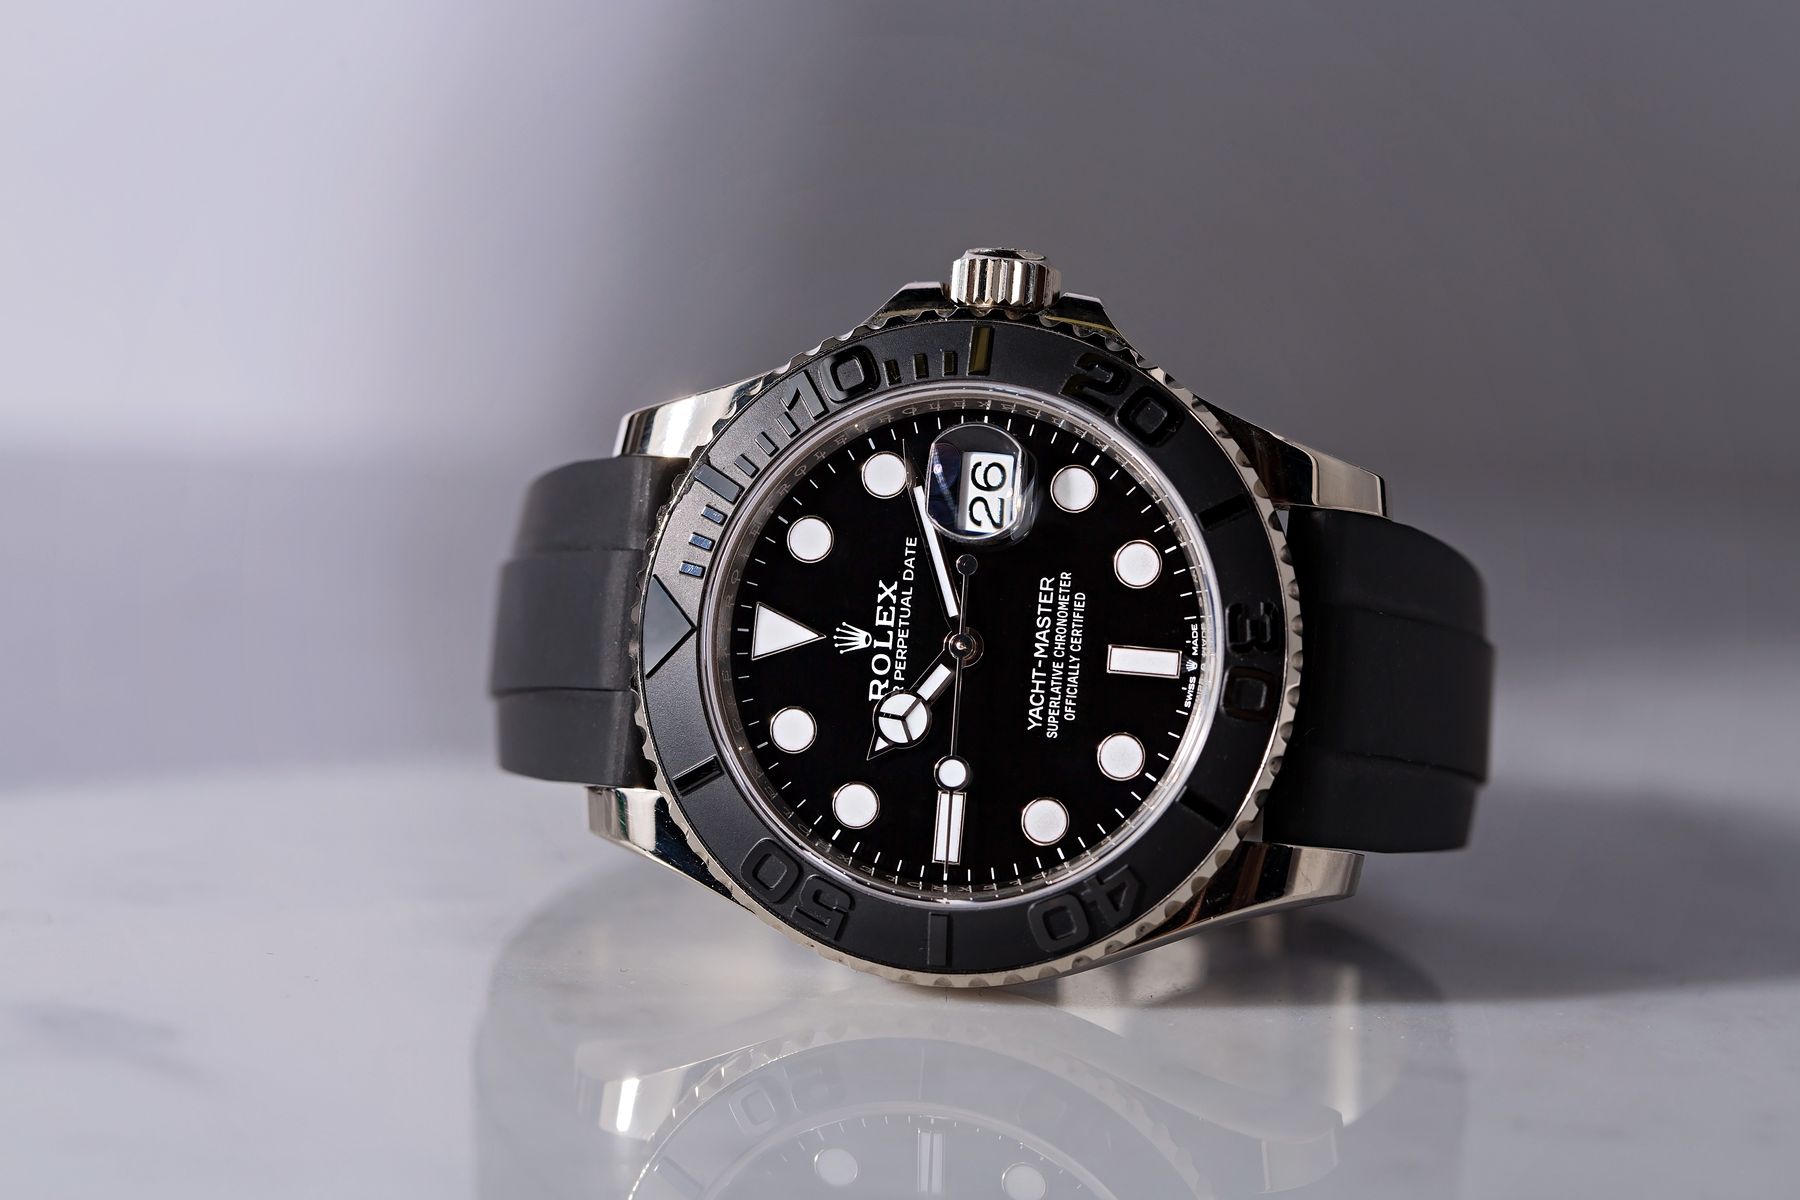 An Overview of the Oysterflex Rolex - Bob's Watches